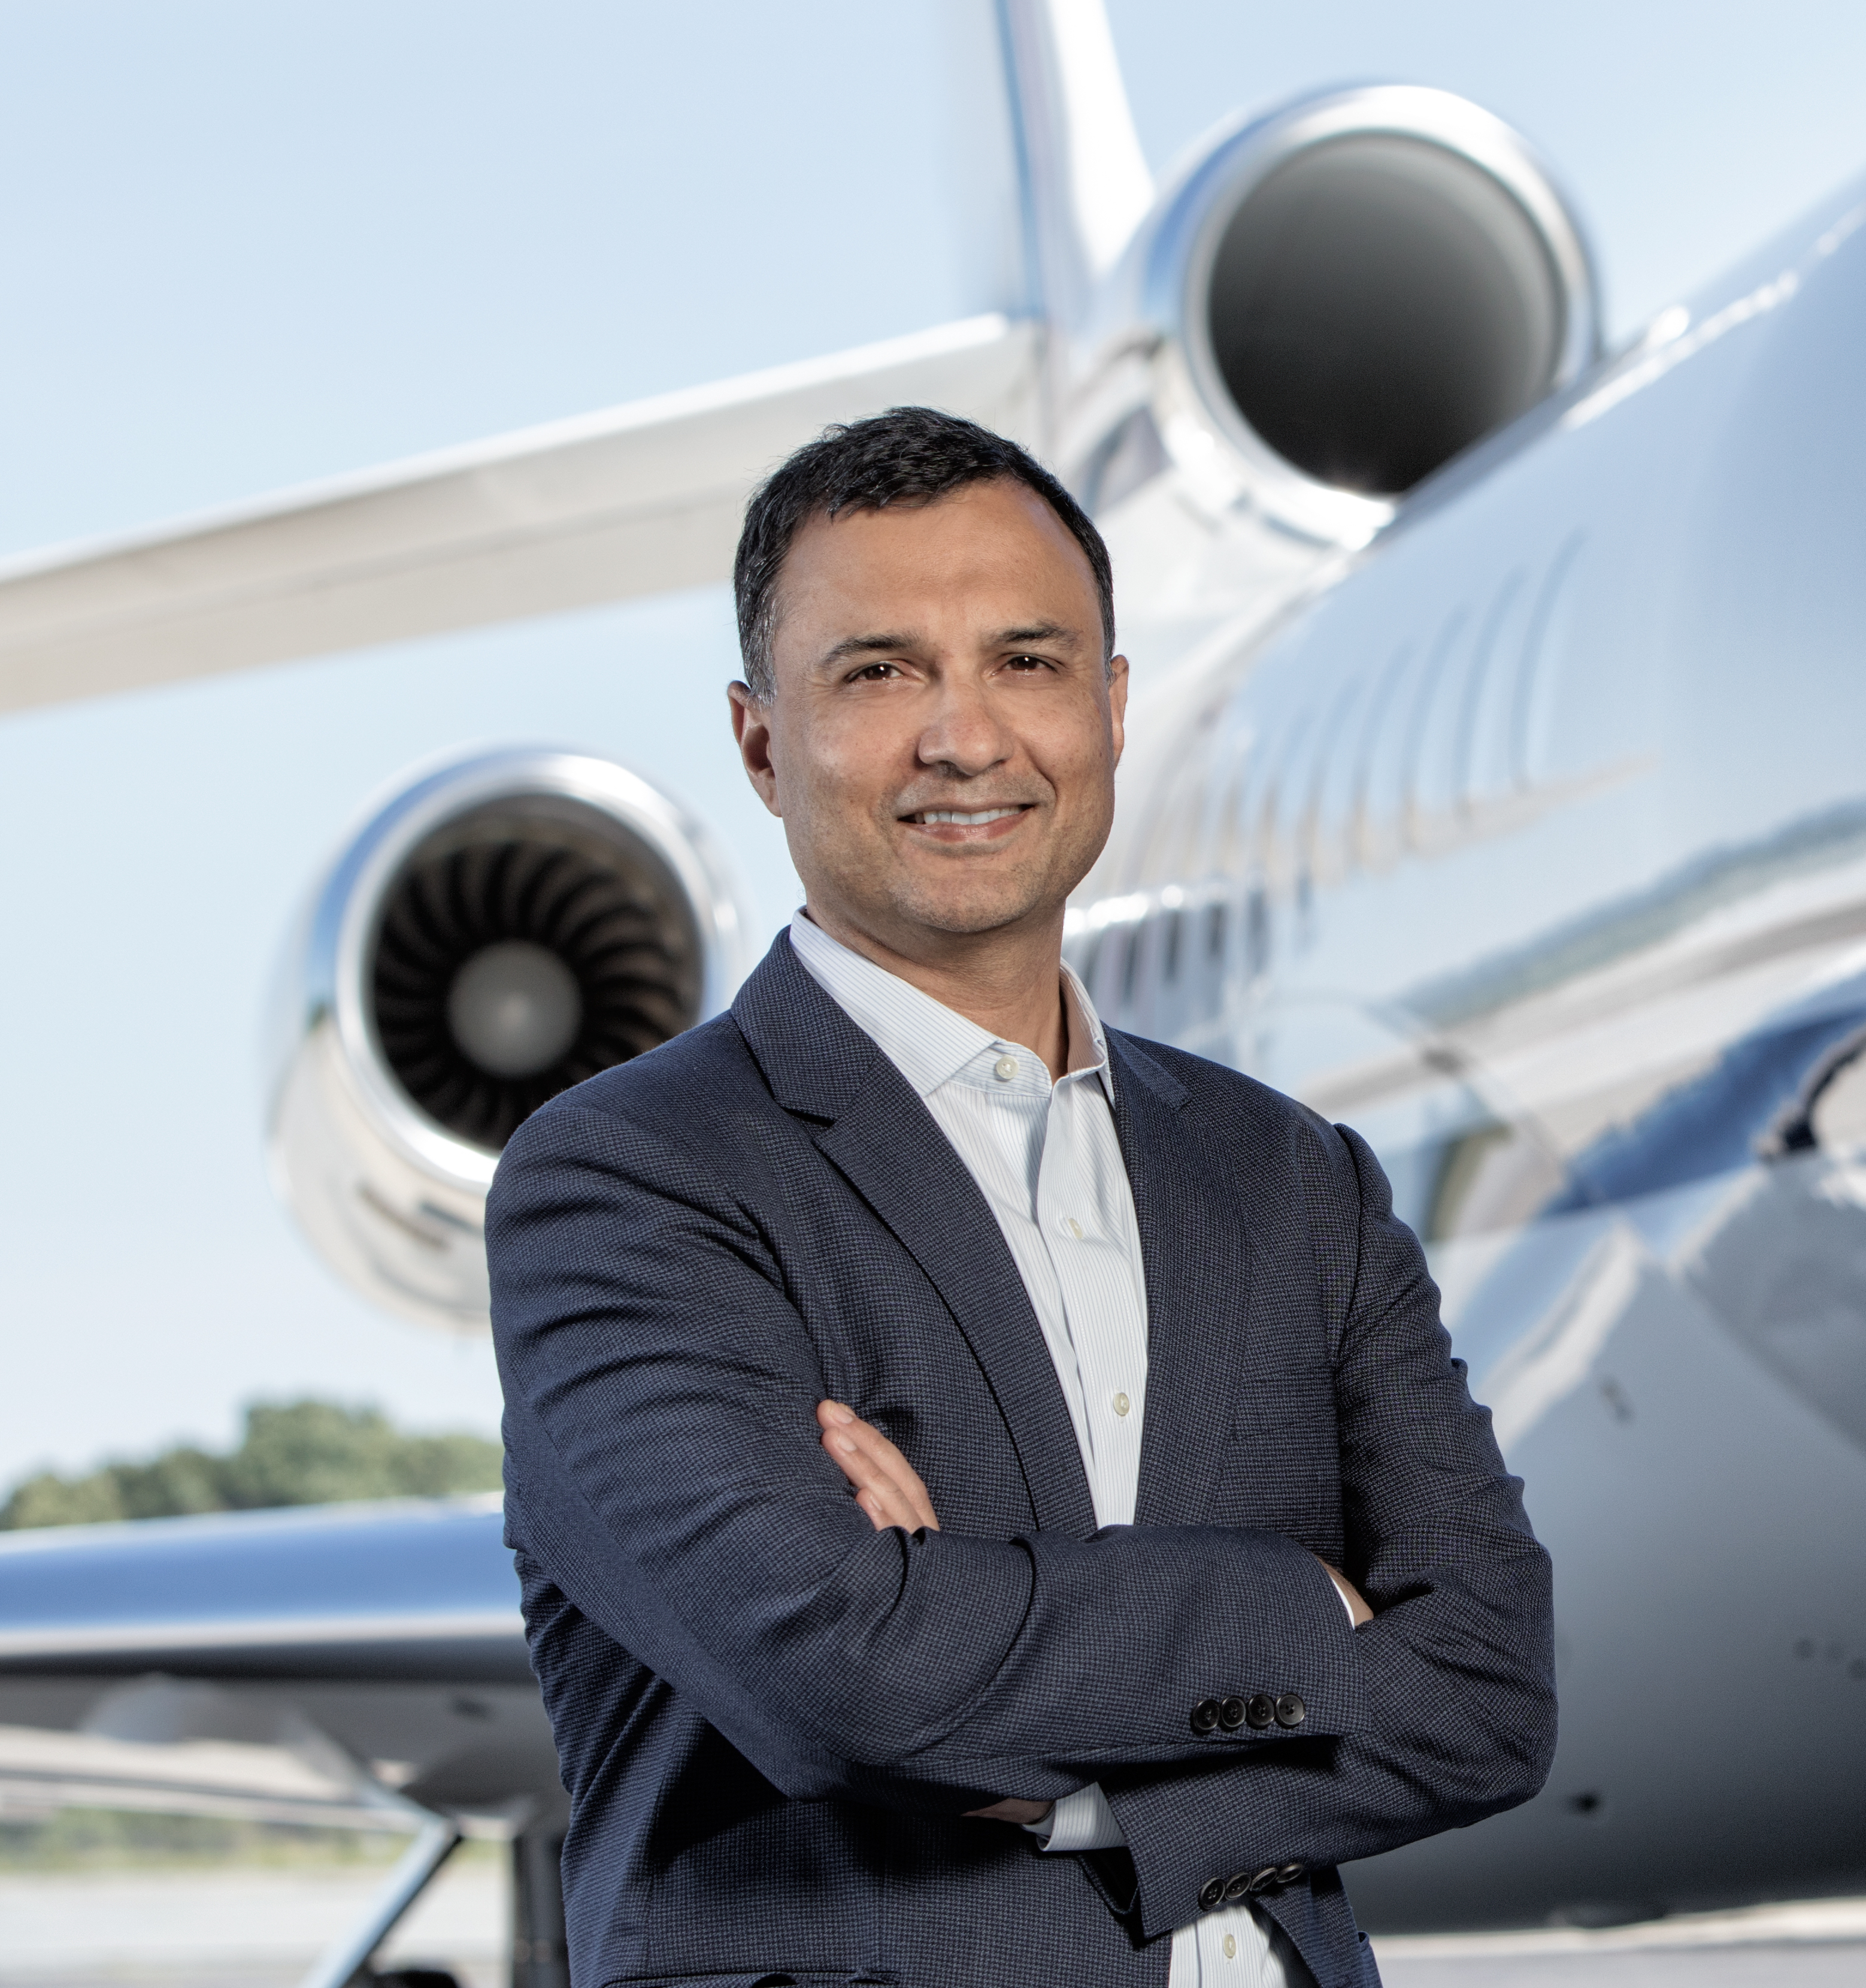 Vivek Kaushal, CEO of Global Jet Capital, stated, “We are very pleased with the results of our latest successful issuance. It underscores the robustness of the BJETS securitization program and the strong performance of the company’s previous ABS transactions. We continue to broaden our investor base, demonstrating the increasing appeal of the business aviation sector and our company. We also appreciate the support of our existing lenders and their continued commitment and confidence in our business. This successful issuance is underpinned by the hard work and dedication of the Global Jet Capital team, and I am grateful for their contributions.”